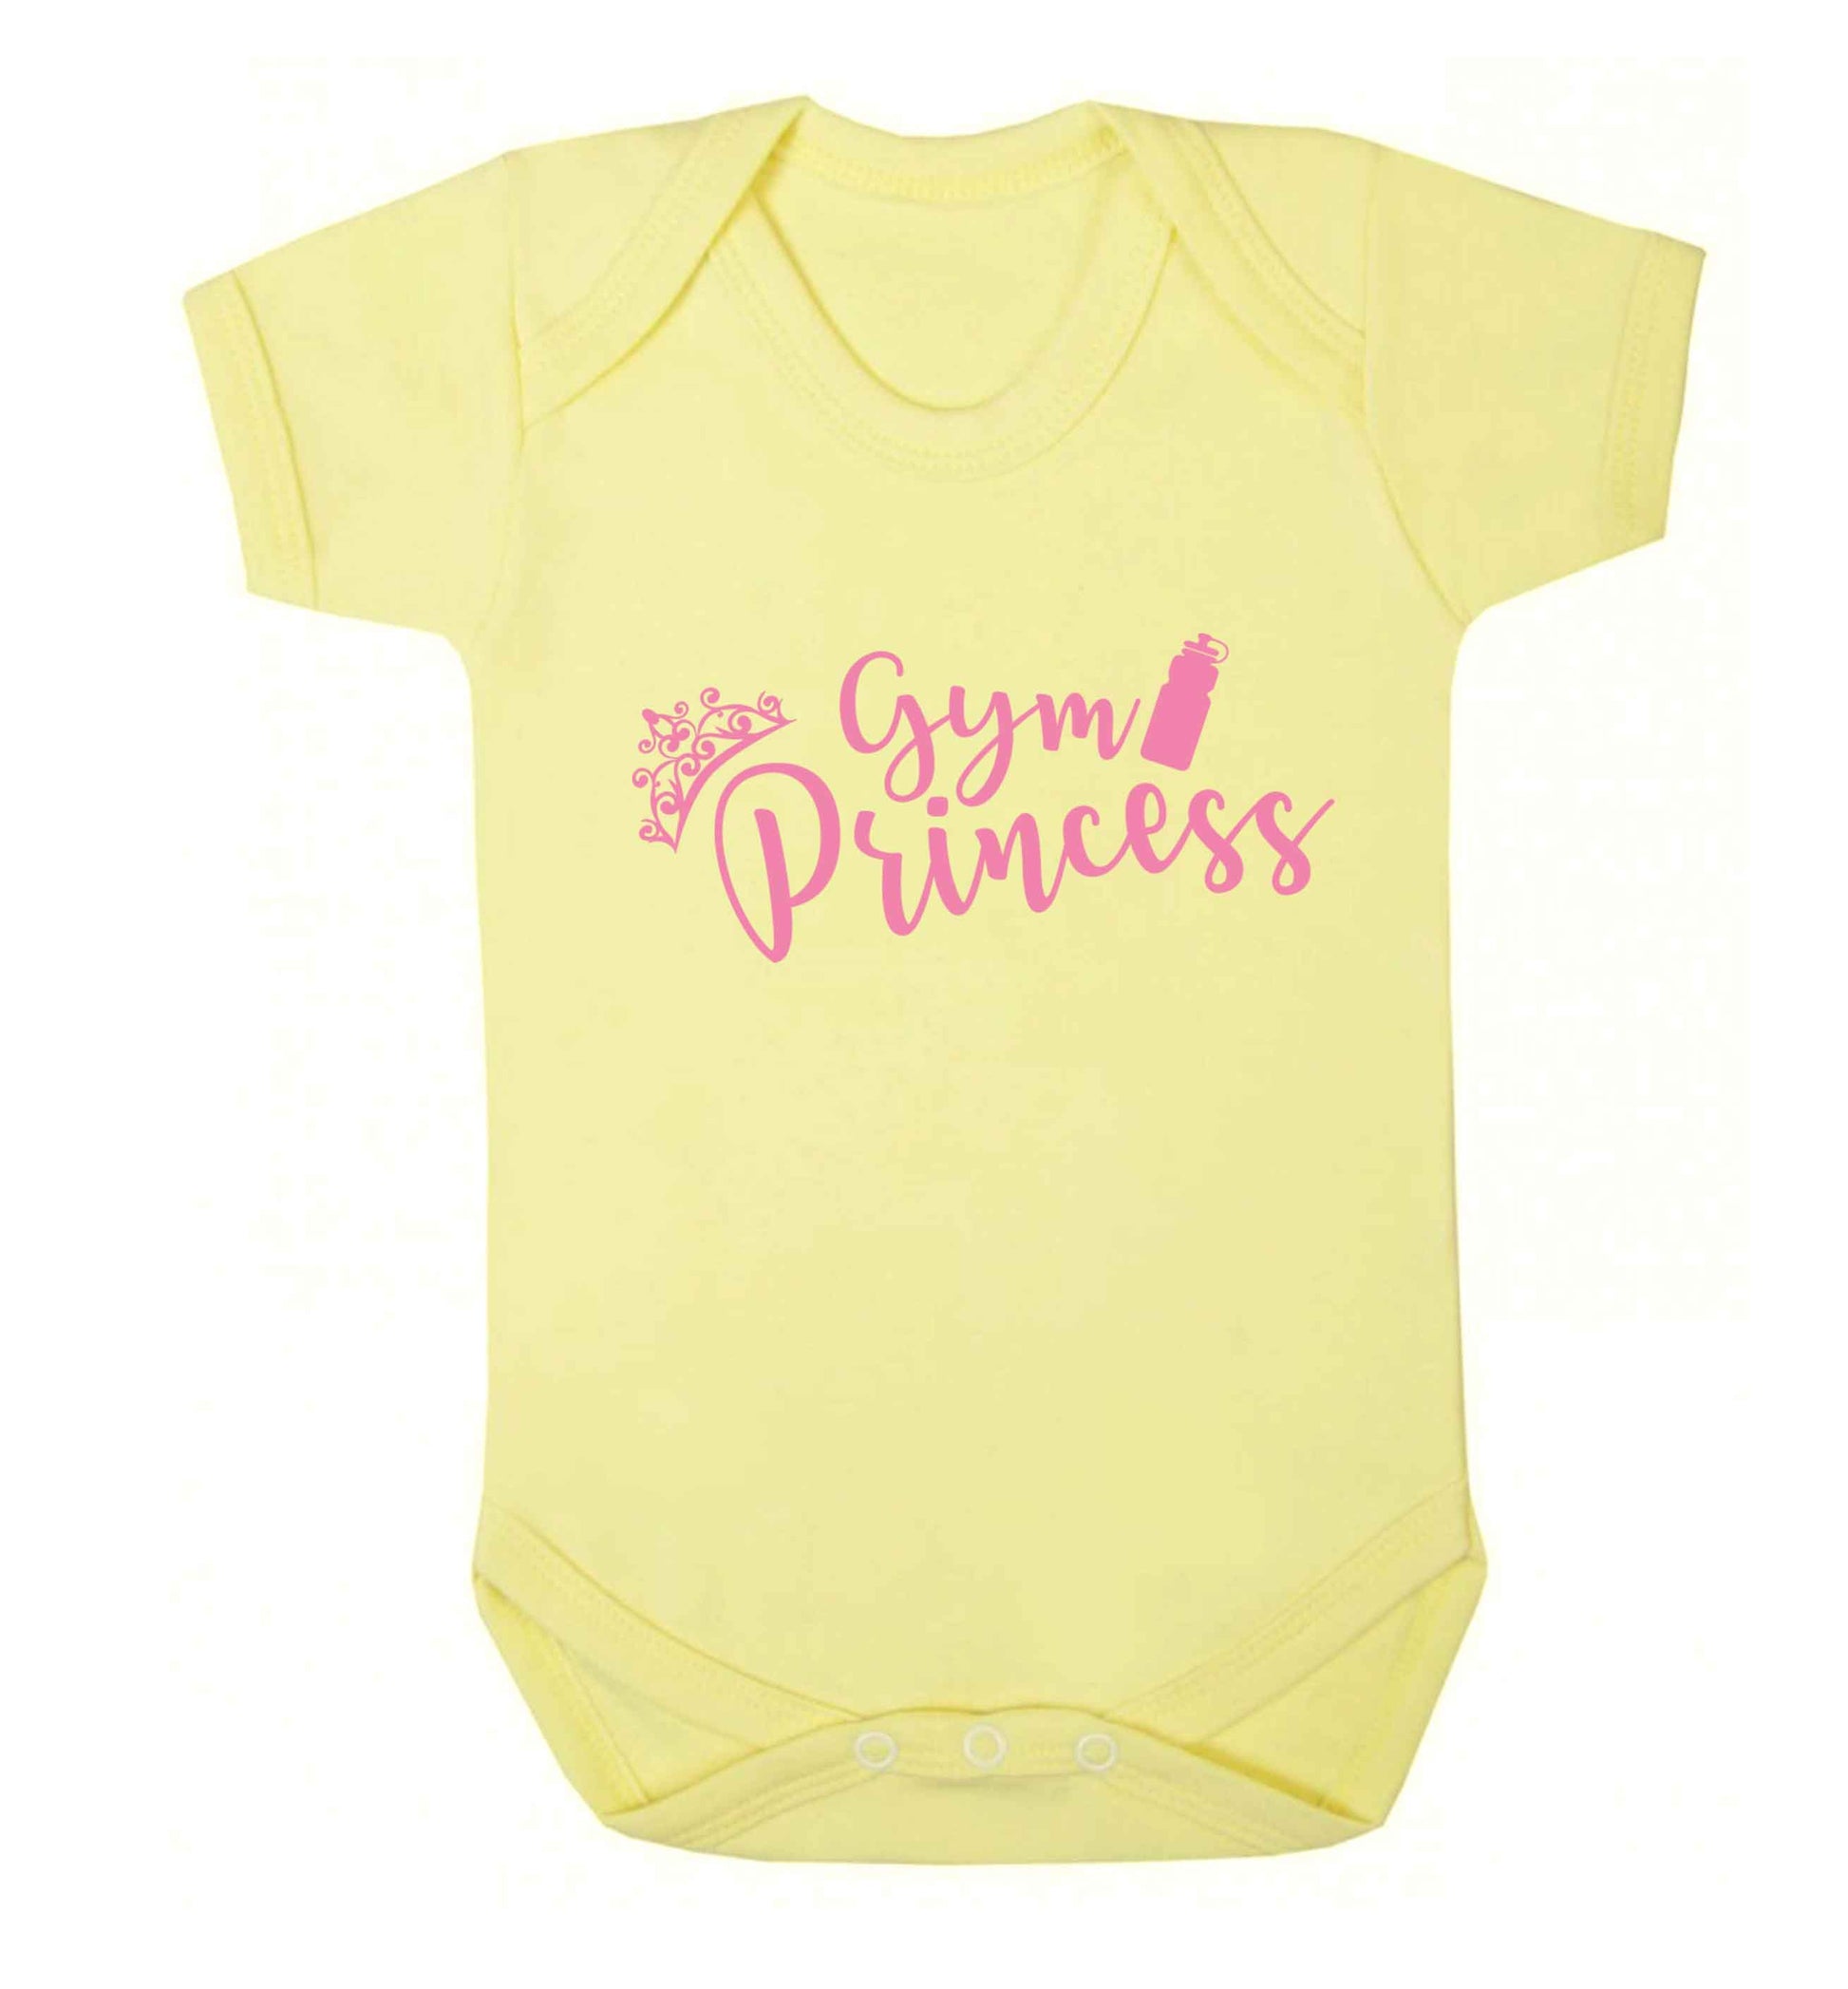 Gym princess Baby Vest pale yellow 18-24 months